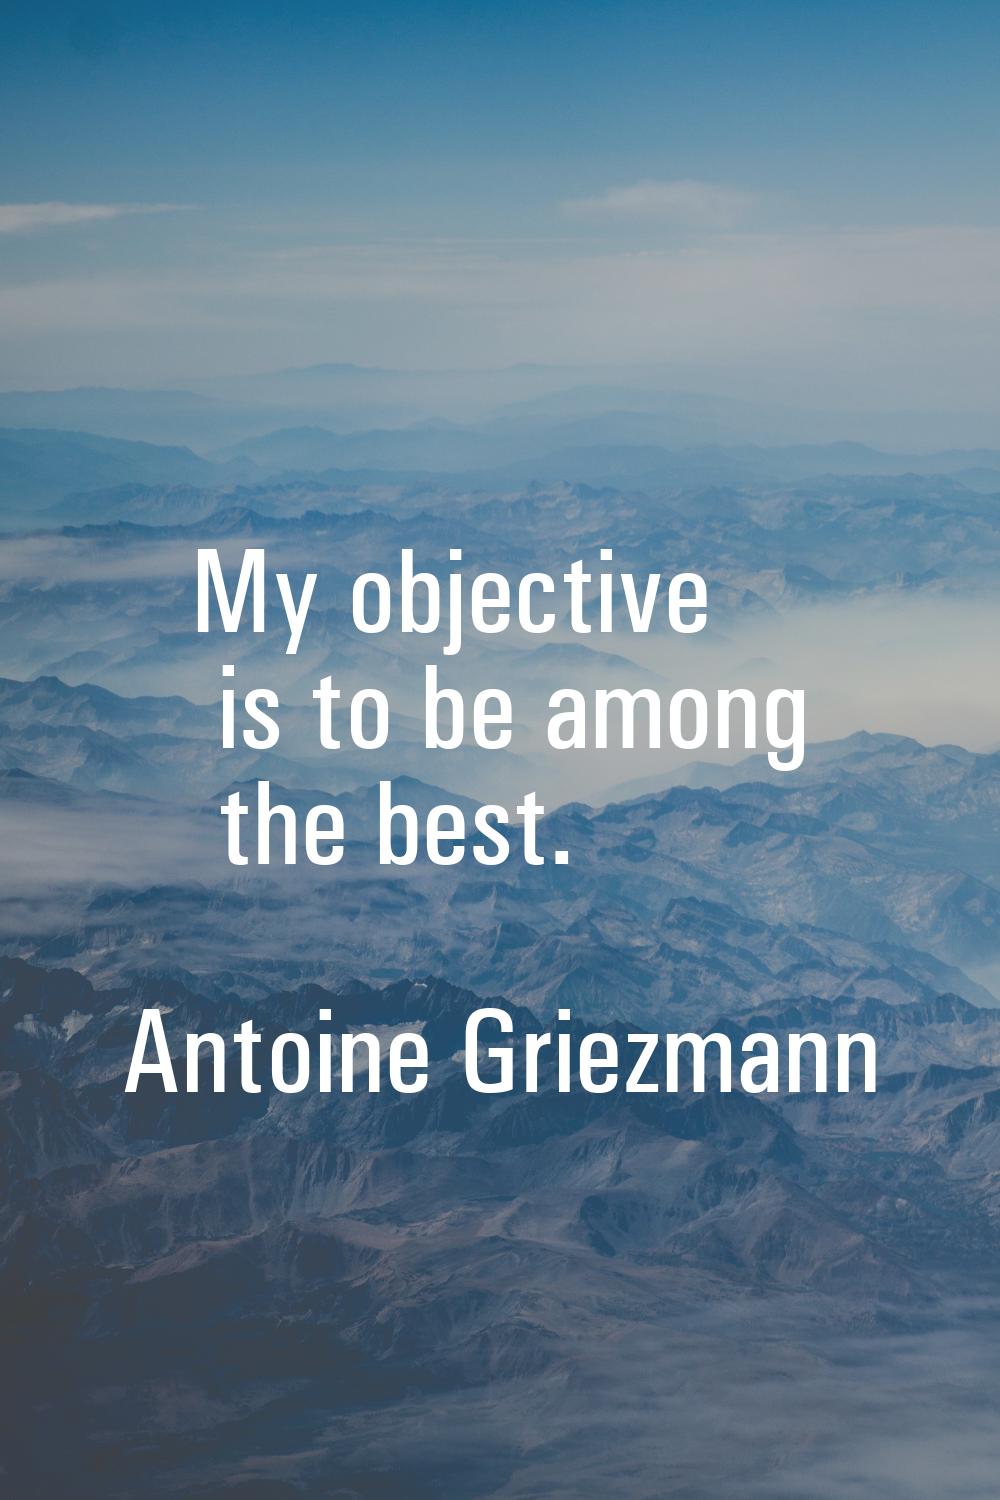 My objective is to be among the best.